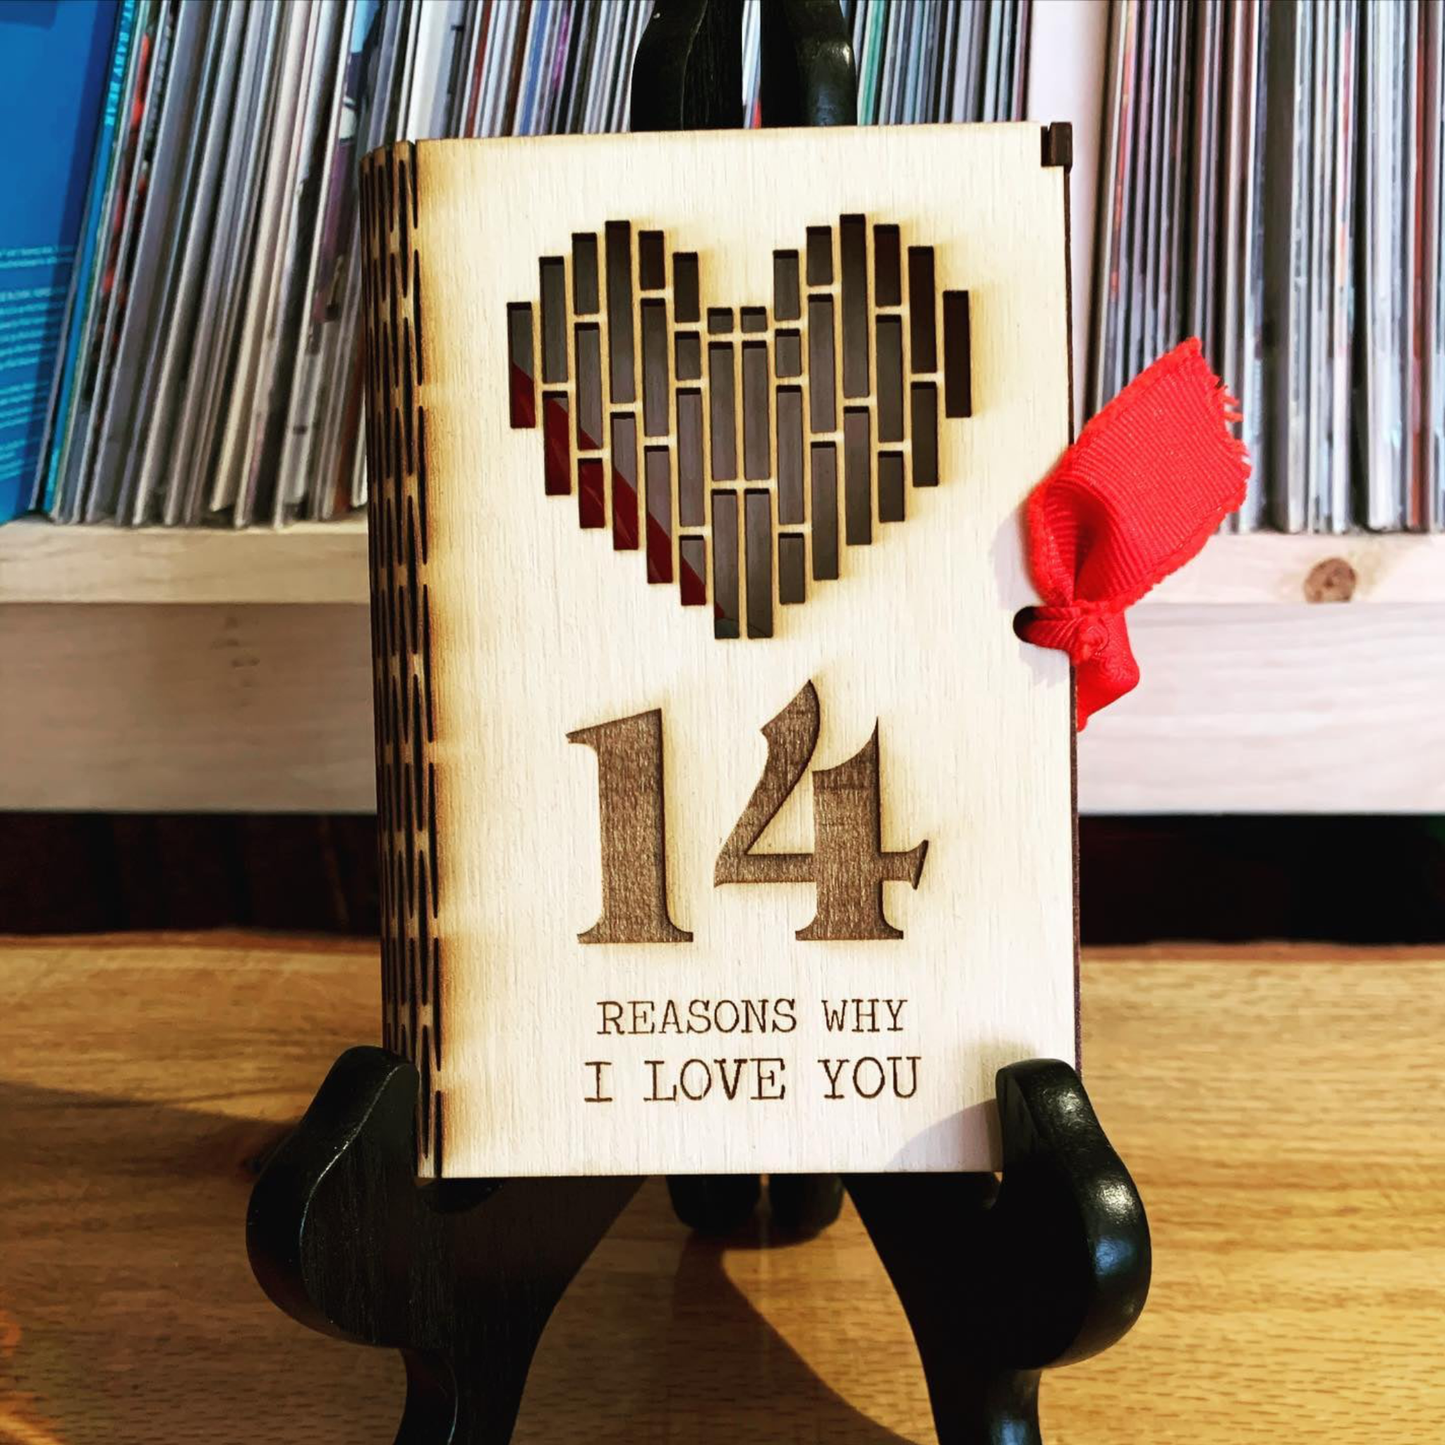 14 Reasons Why I Love You Wooden Book